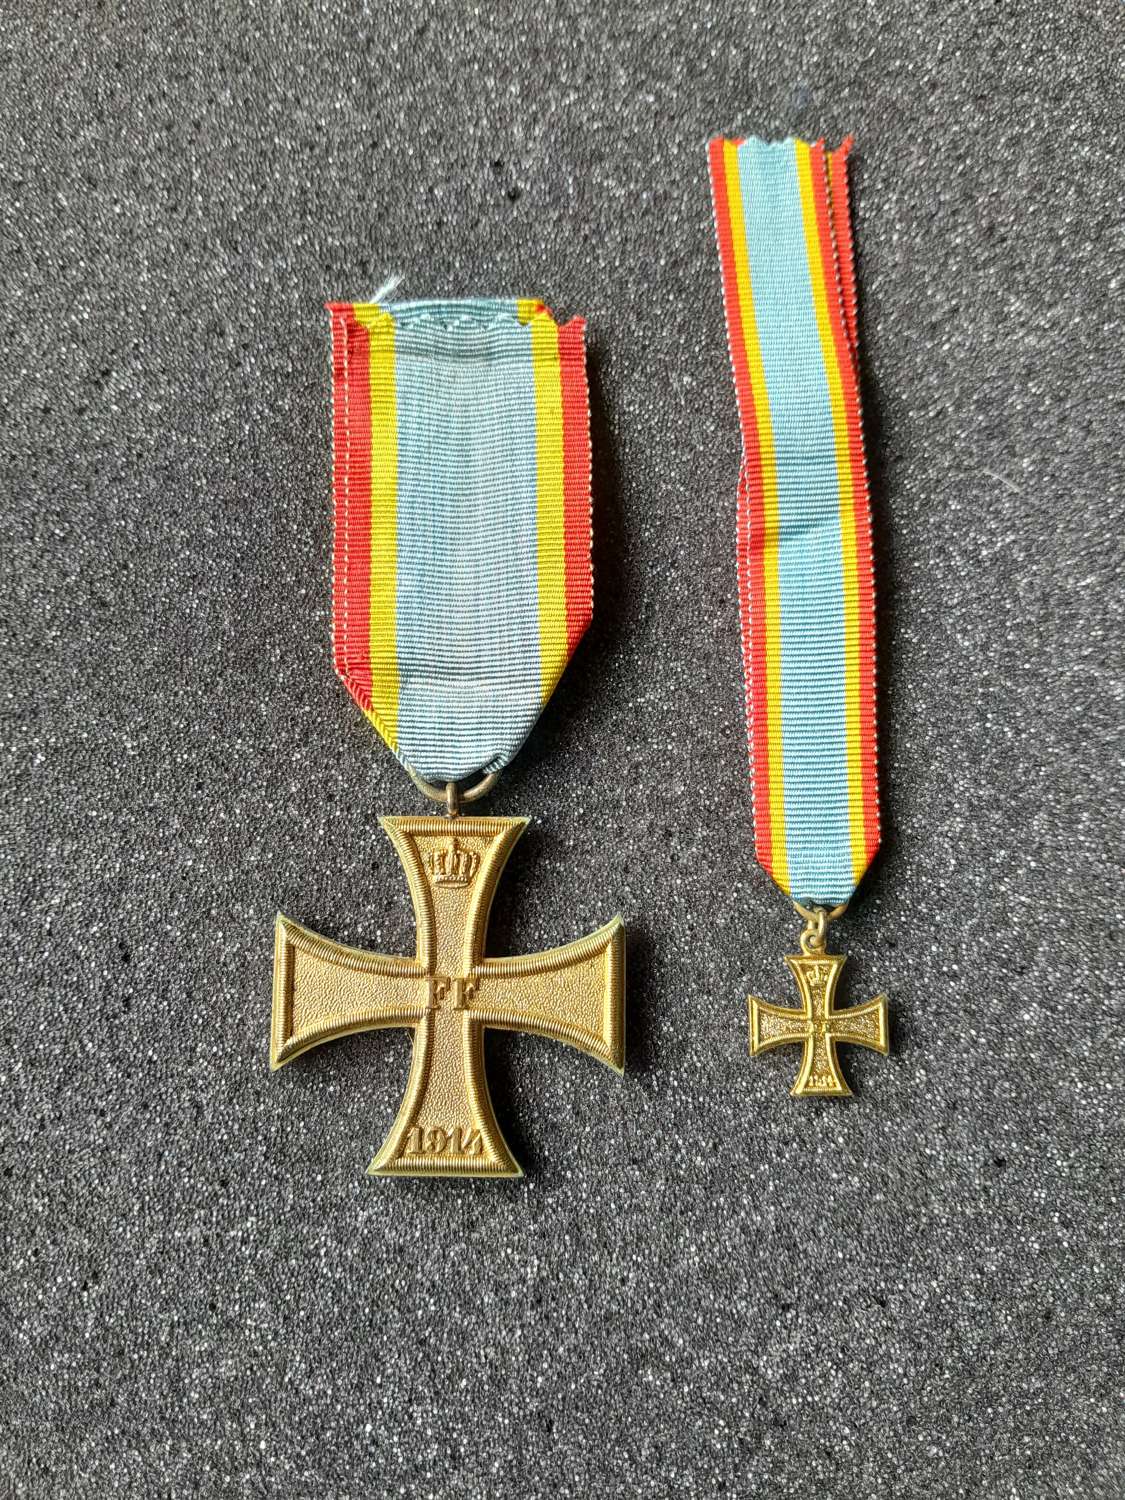 Mecklenburg Military Cross of Merit 1914 With Minature